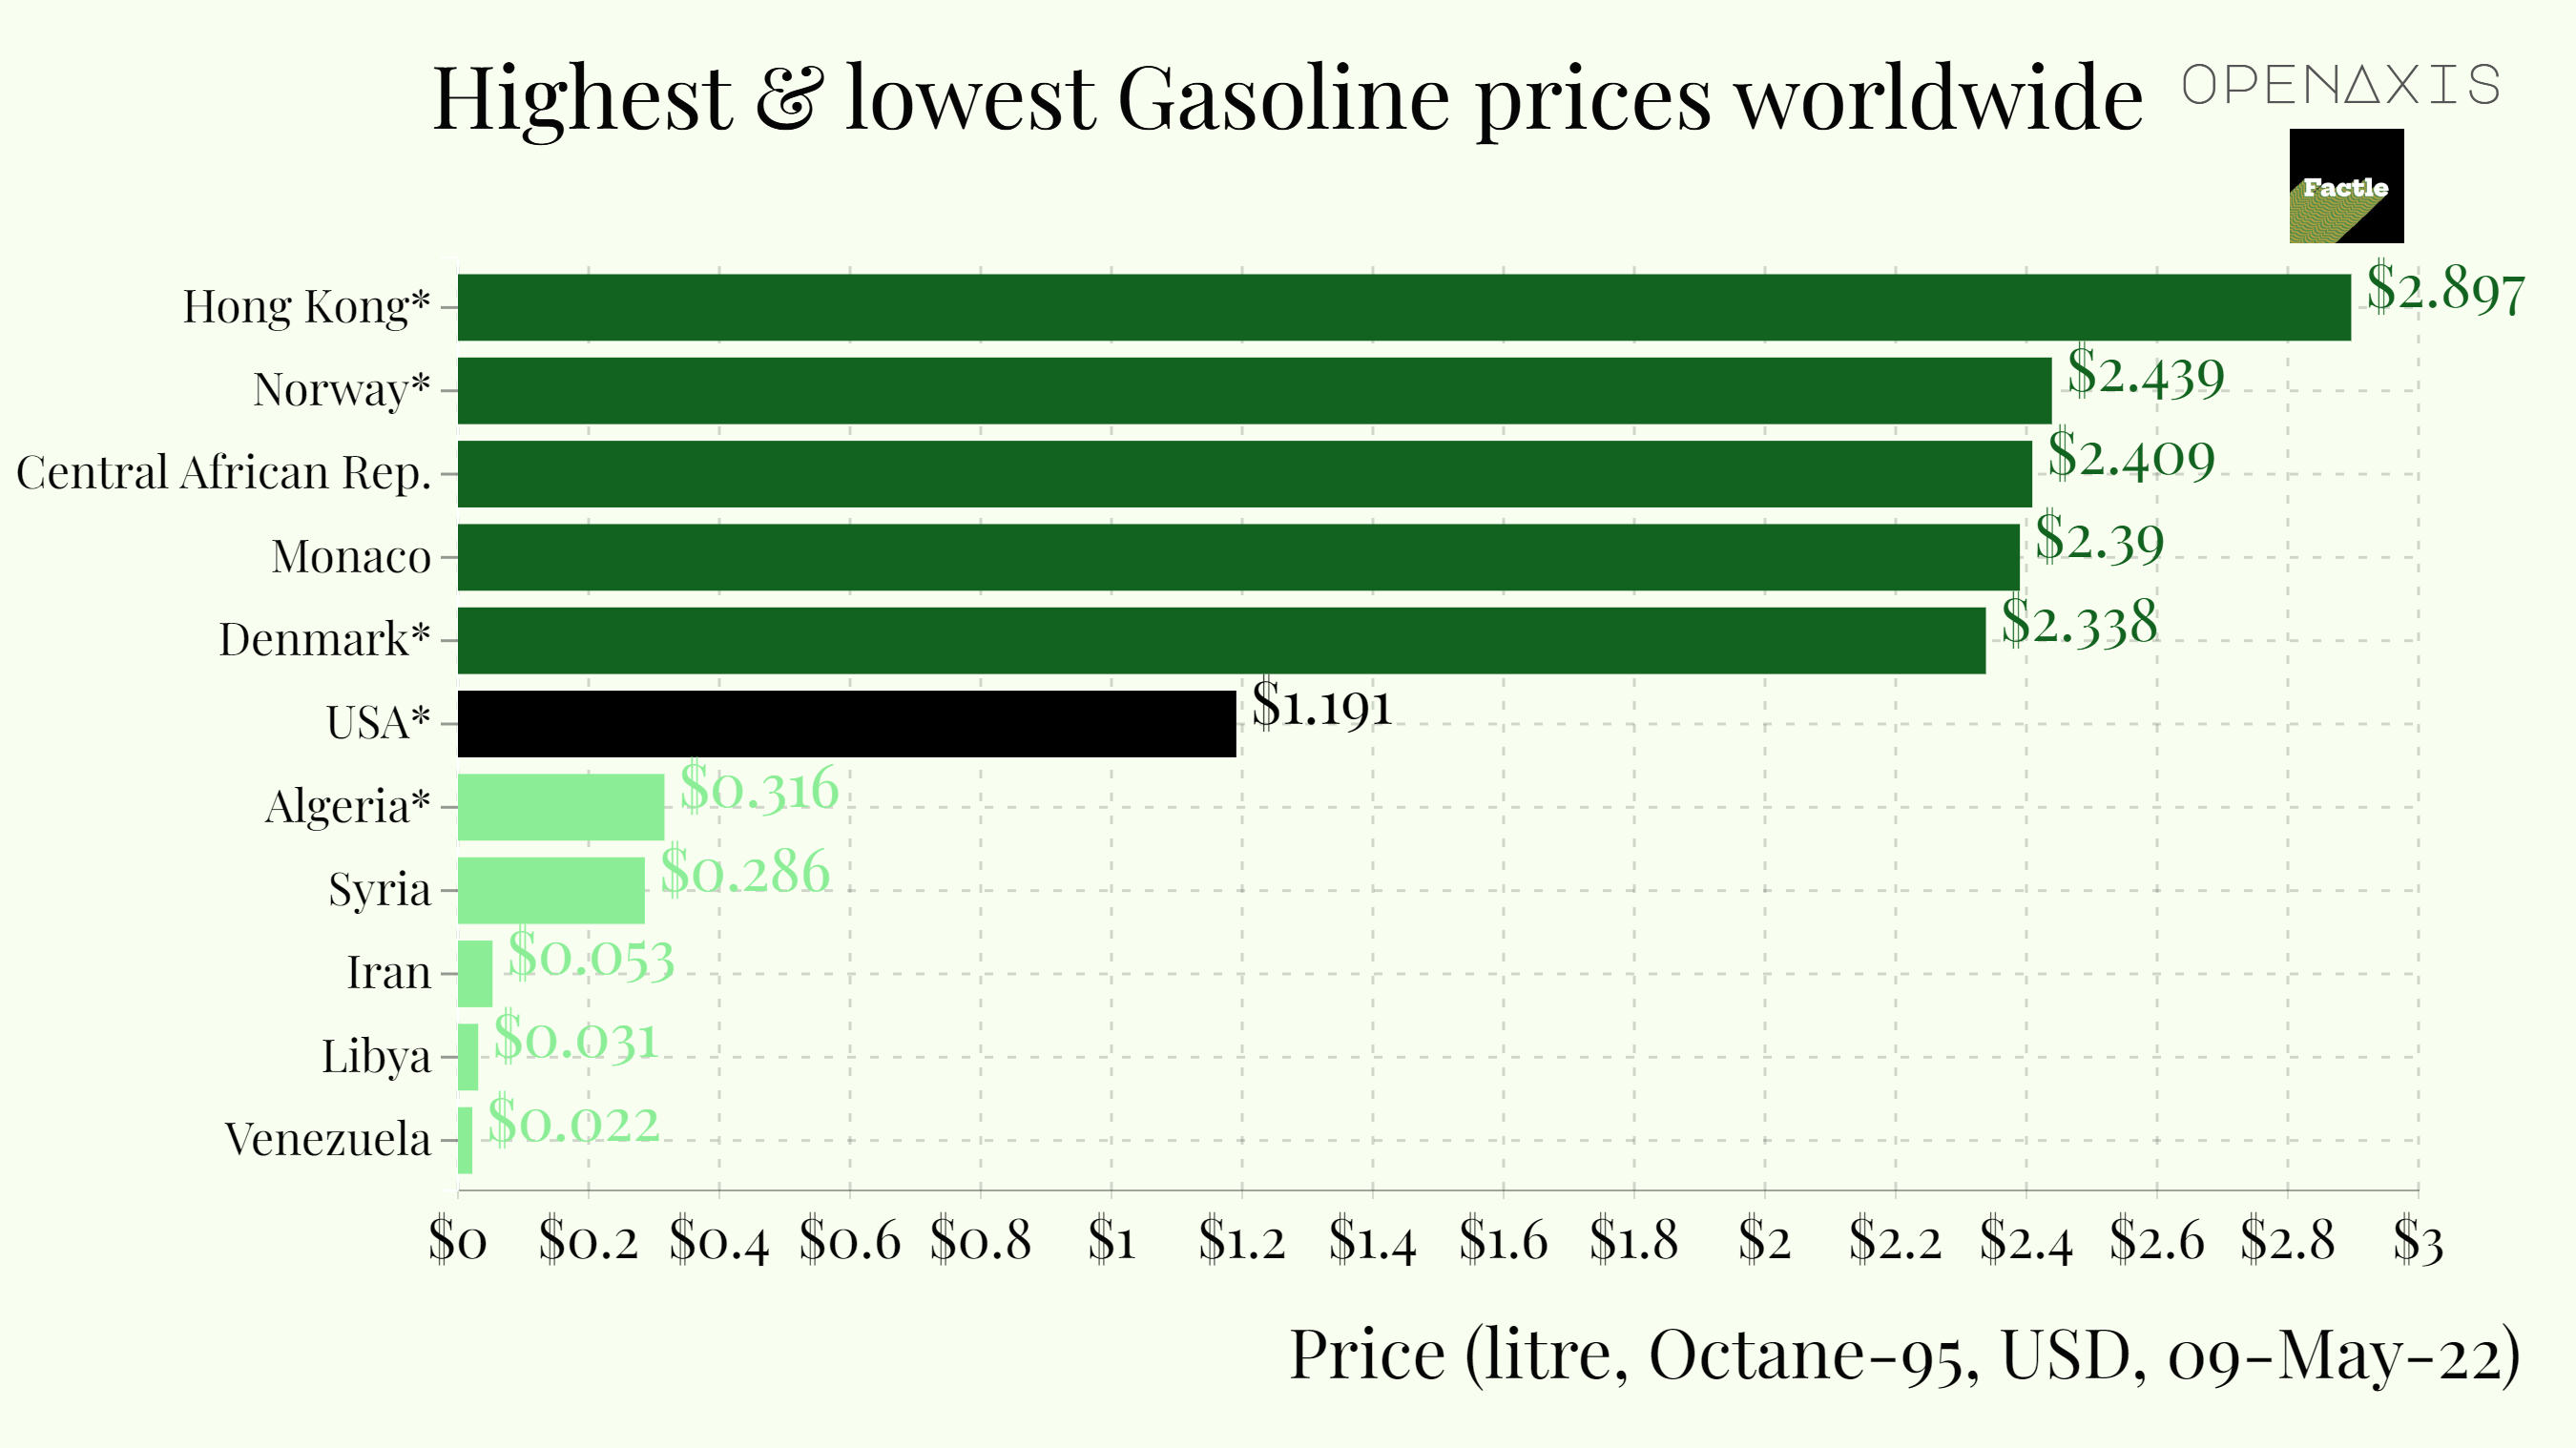 <p><strong>Gasoline prices, Octane-95</strong>, <em>09-May-2022 </em>: The average price of gasoline around the world is 1.35 U.S. Dollar per litre. However, there is substantial difference in these prices among countries.</p><p><br /></p><p>As a general rule, richer countries have higher prices while poorer countries and the countries that produce and export oil have significantly lower prices. One notable exception is the U.S. which is an economically advanced country but has low gas prices. The differences in prices across countries are due to the various taxes and subsidies for gasoline.</p><p><br /></p><p>All countries have access to the same petroleum prices of international markets but then decide to impose different taxes.</p><p><br /></p><p>As a result, the retail price of gasoline is different. Above are the top 5 highest and lowest gas prices per country, with the US thrown in as a benchmark. </p><p><br /></p><p>Source: <a href="/data/3736" target="_blank">Global Petrol Prices</a></p><p><br /></p>